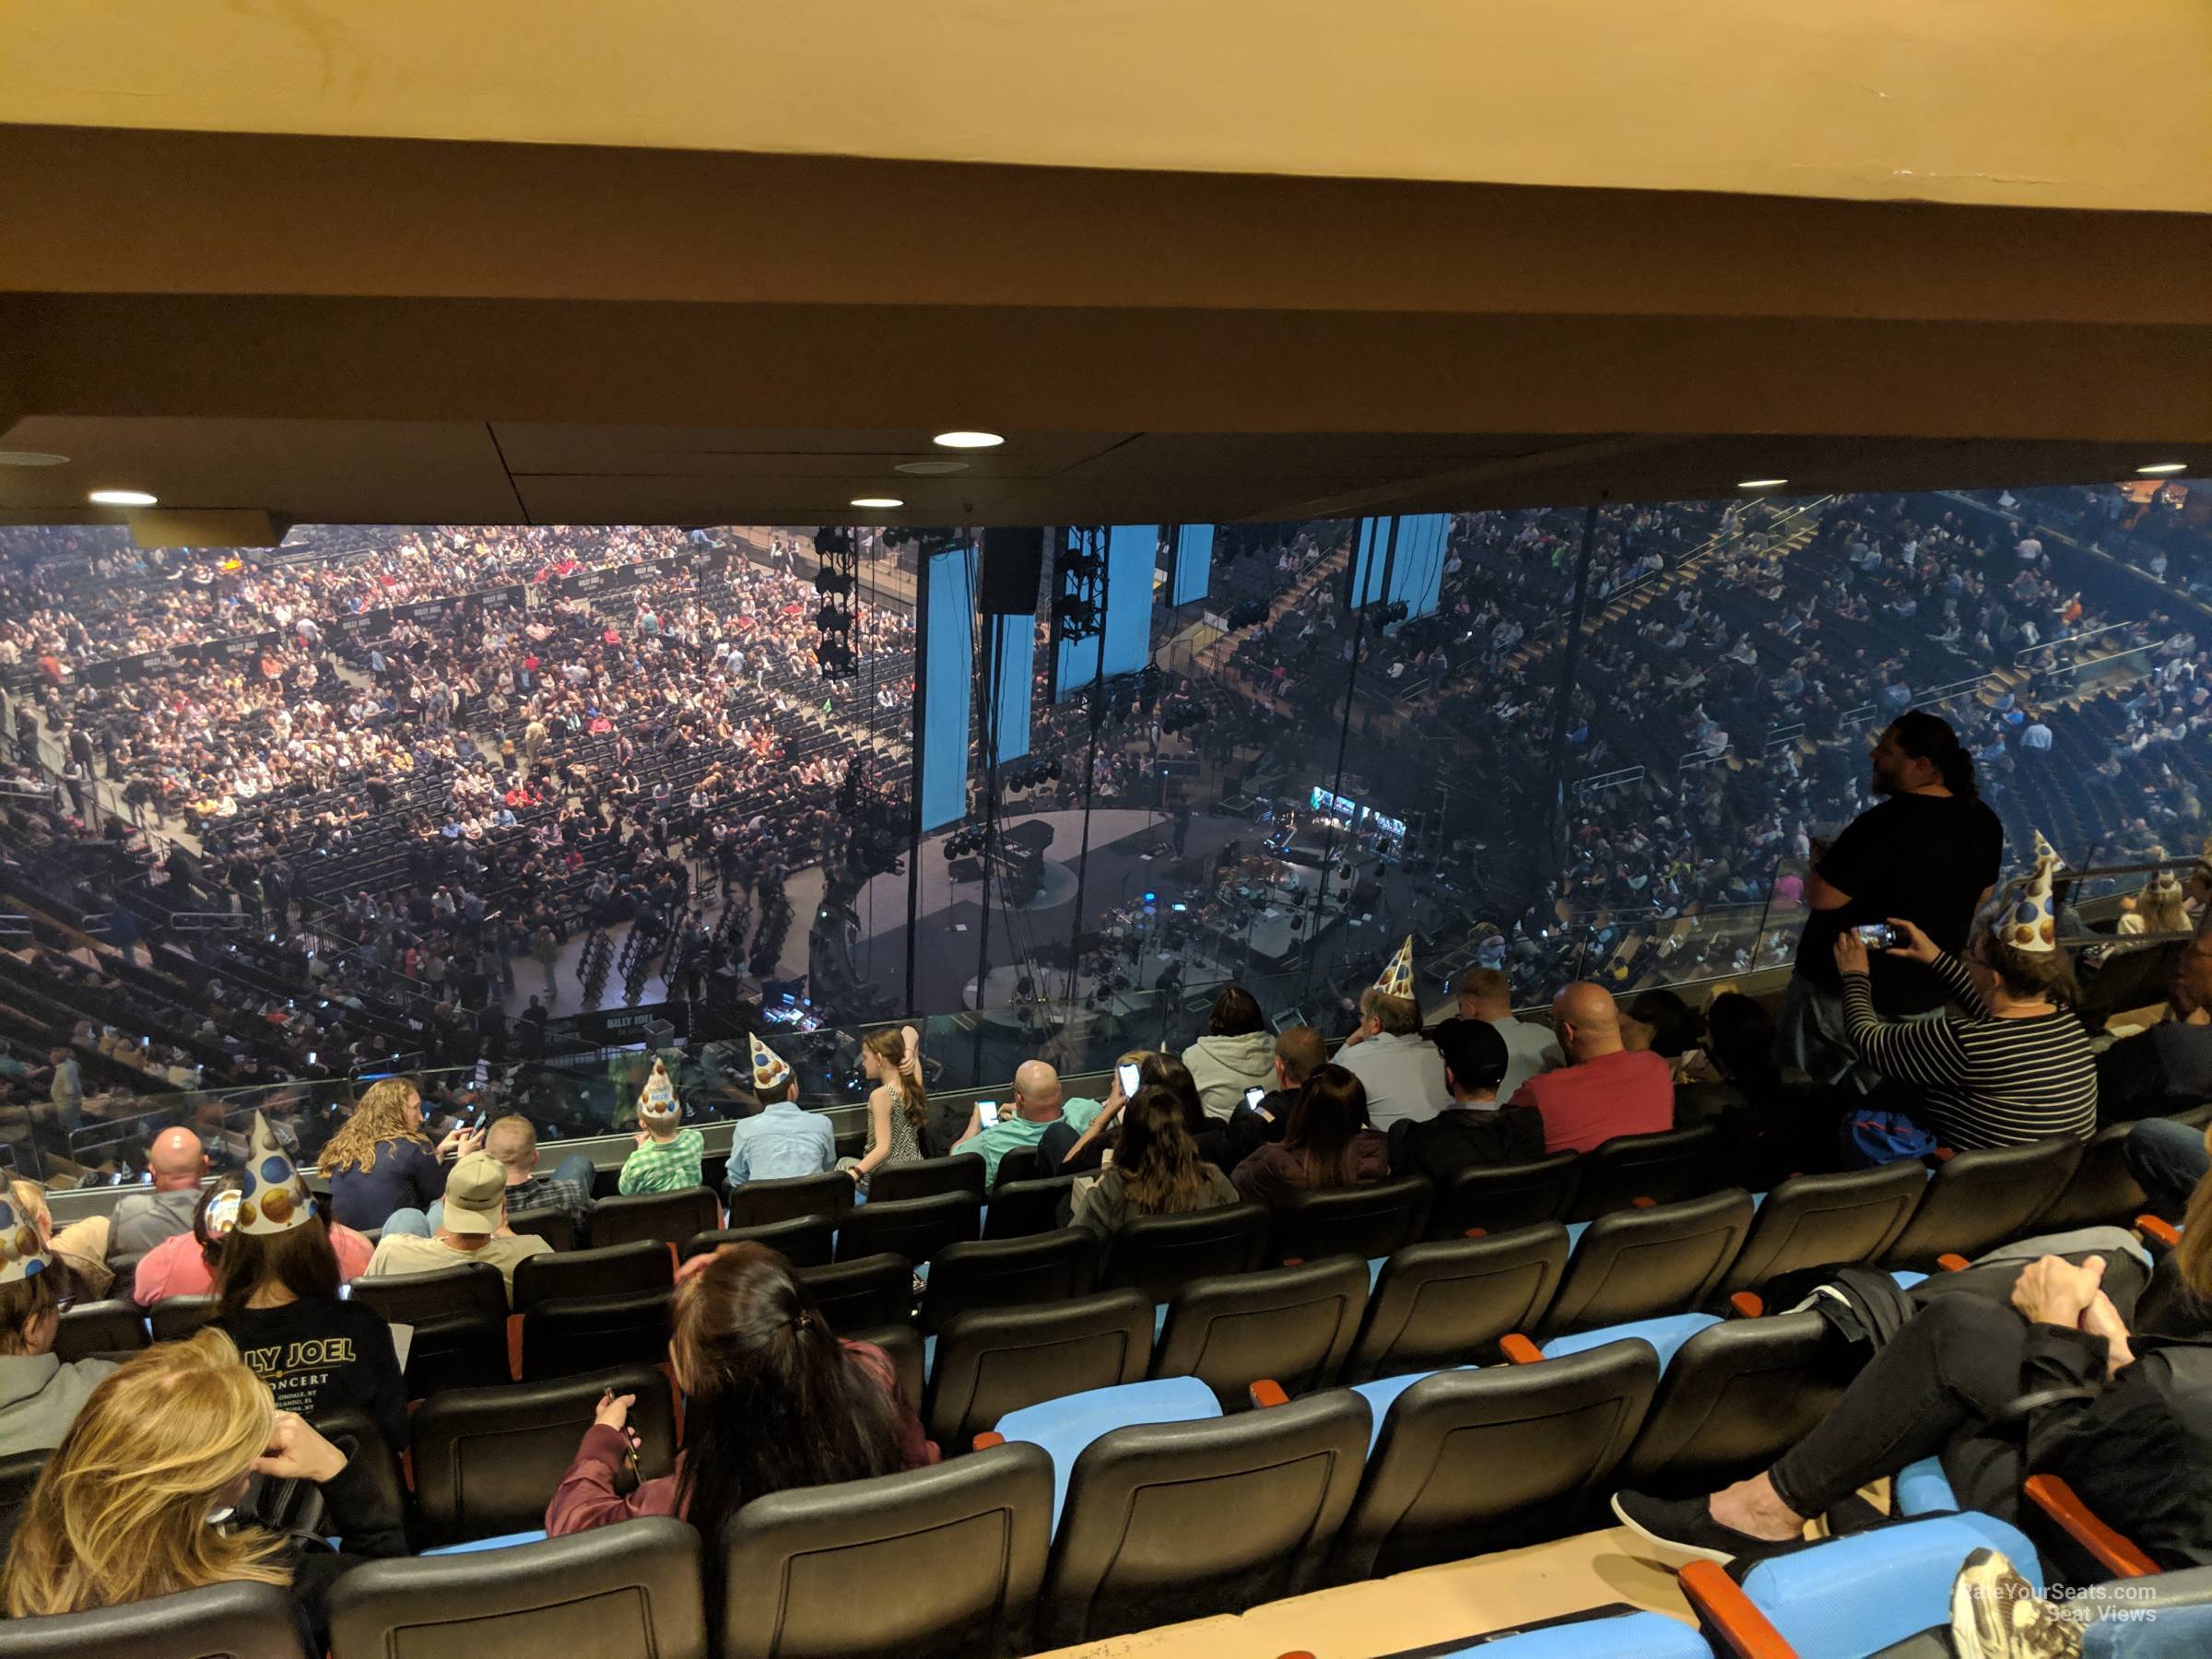 section 414, row 7 seat view  for concert - madison square garden